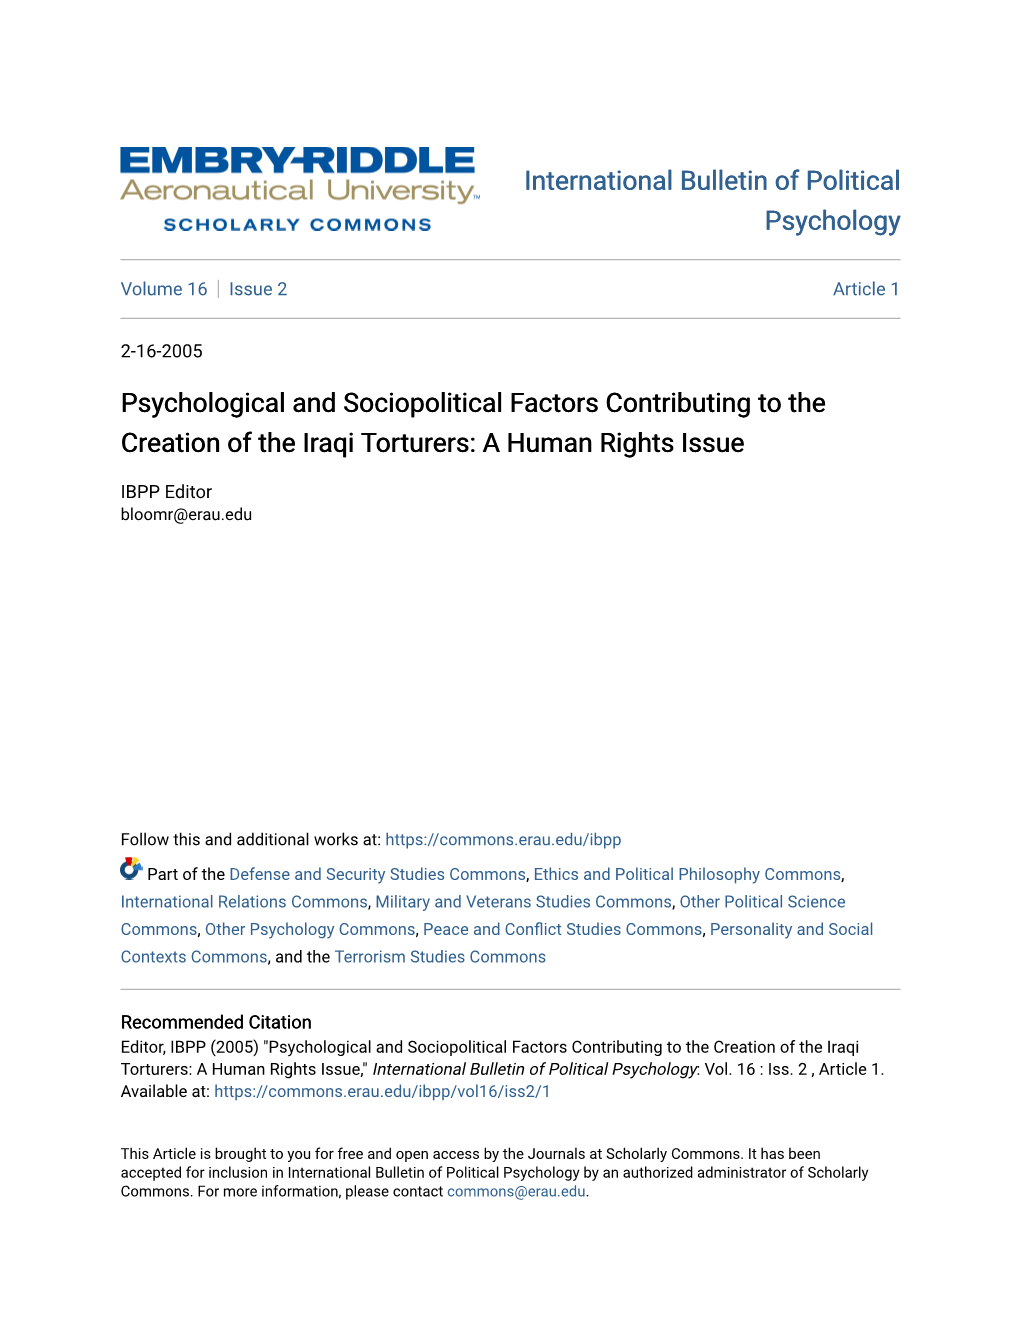 Psychological and Sociopolitical Factors Contributing to the Creation of the Iraqi Torturers: a Human Rights Issue